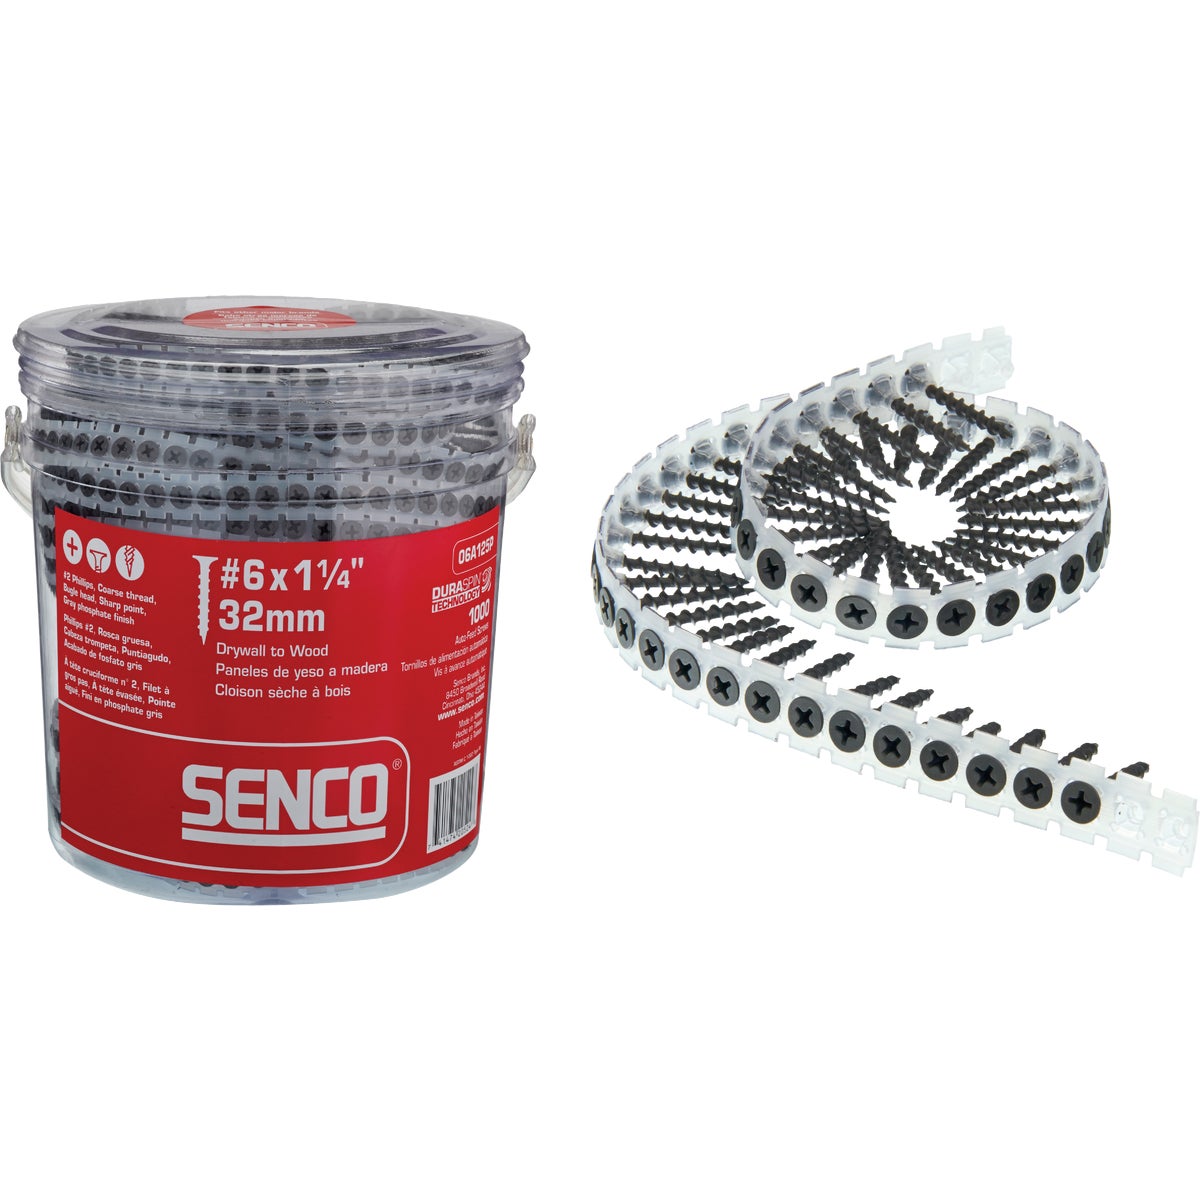 Item 348503, Sharp point drywall screws used for fastening interior drywall to wood.